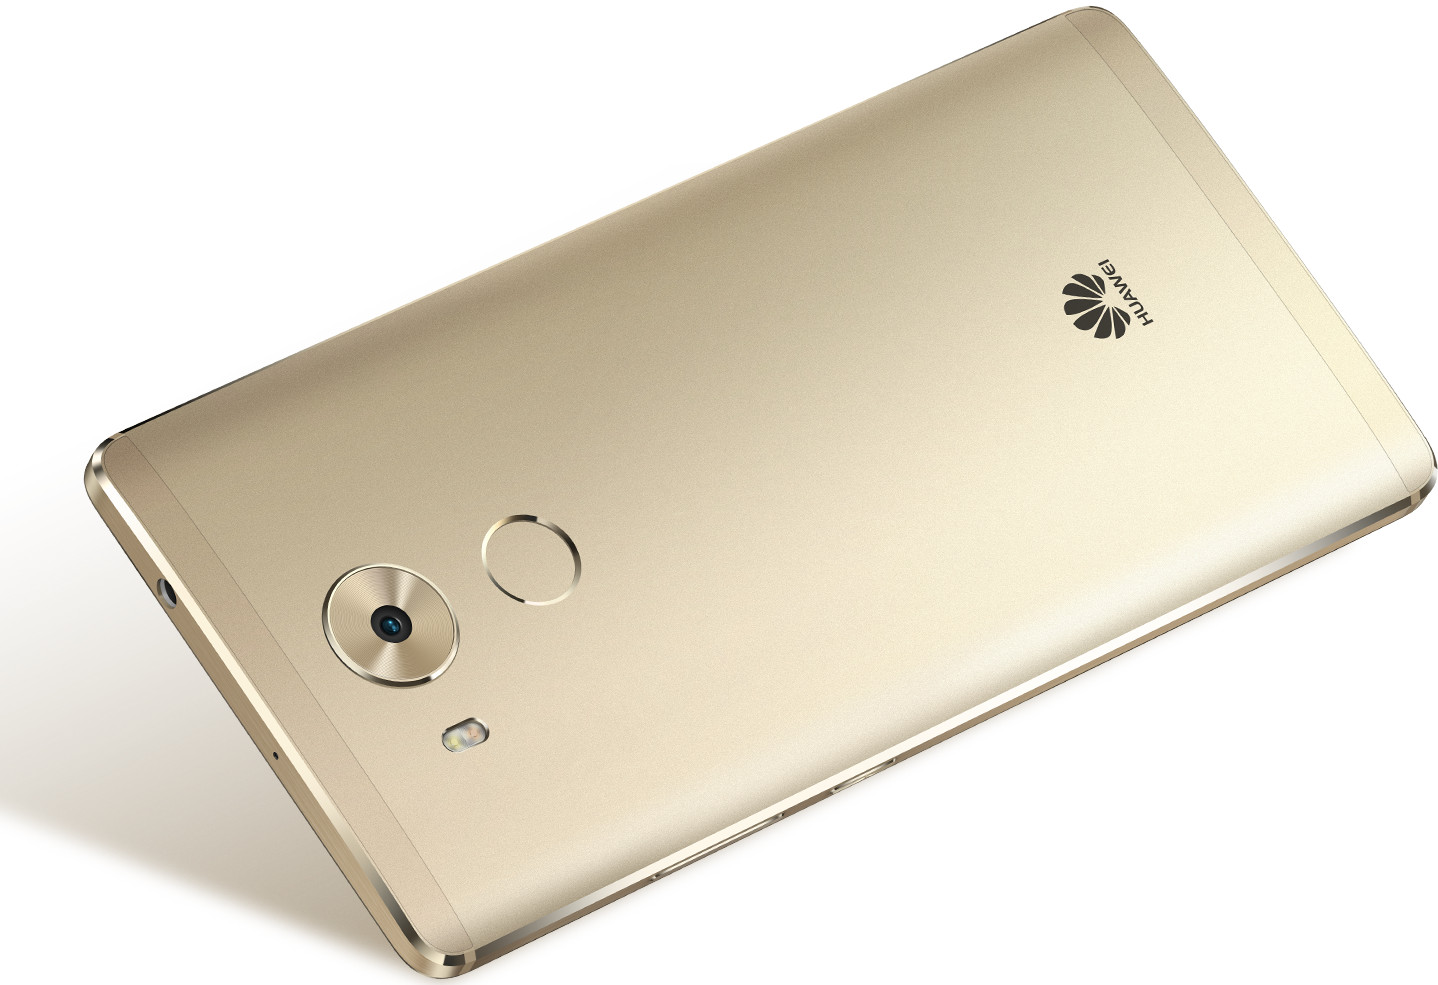 Huawei Mate 8 official